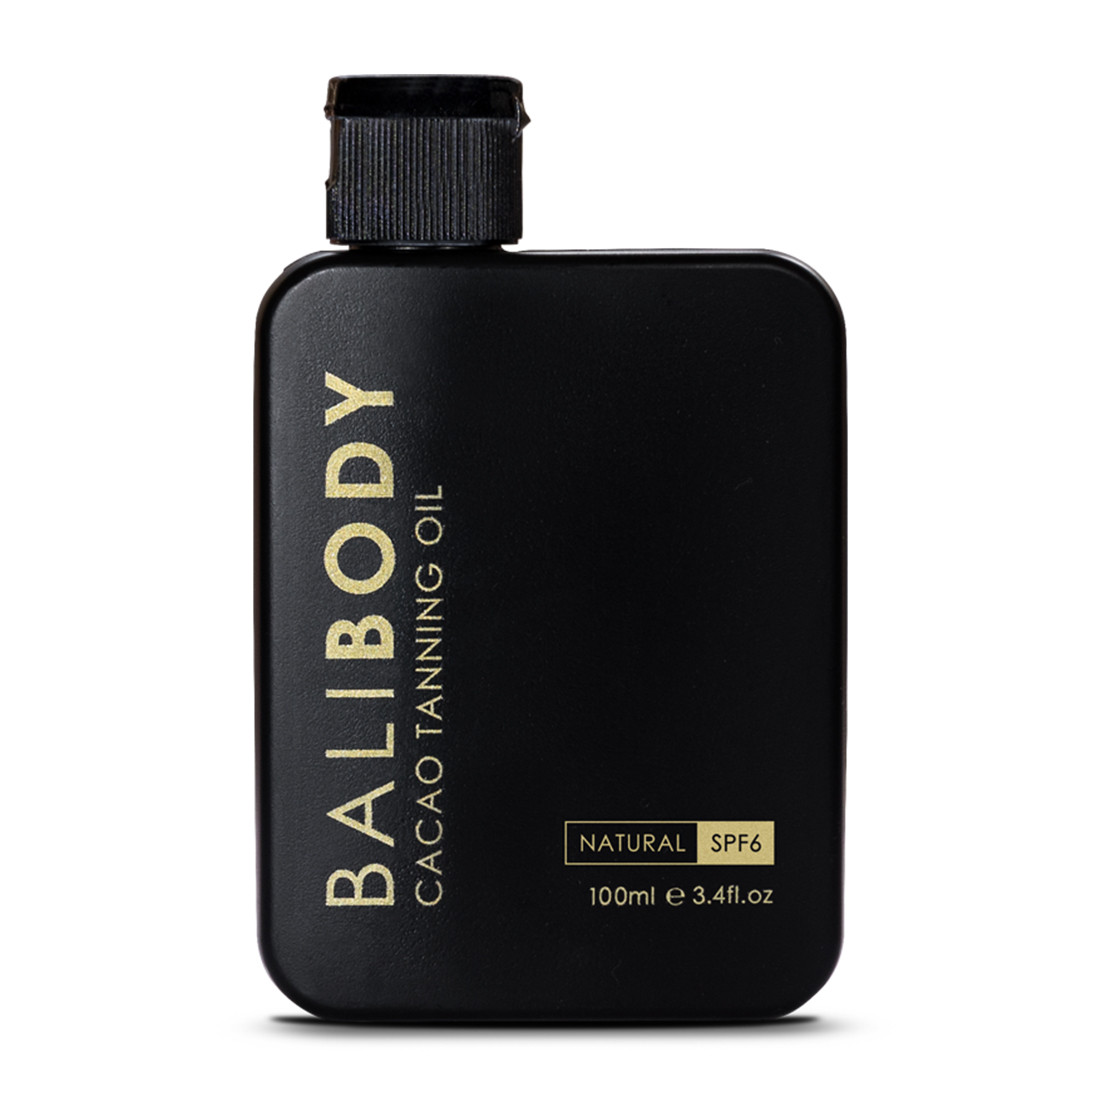 Bali Body Cacao Tanning Oil SPF6 - Масло для загара с какао